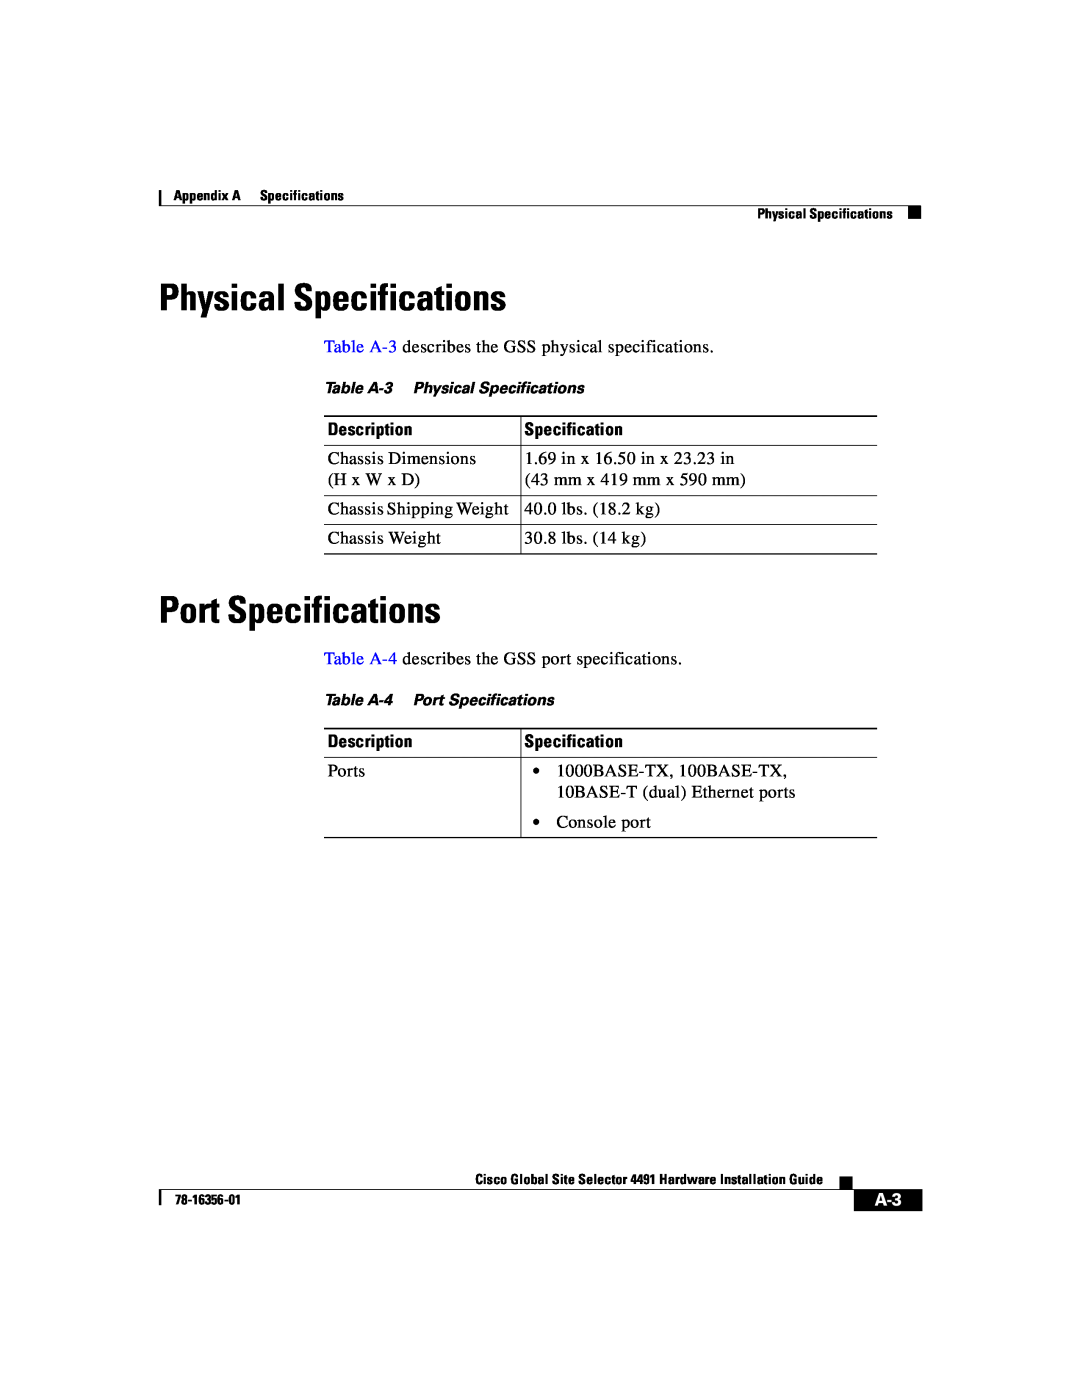 Cisco Systems 78-16356-01 manual Physical Specifications, Port Specifications 